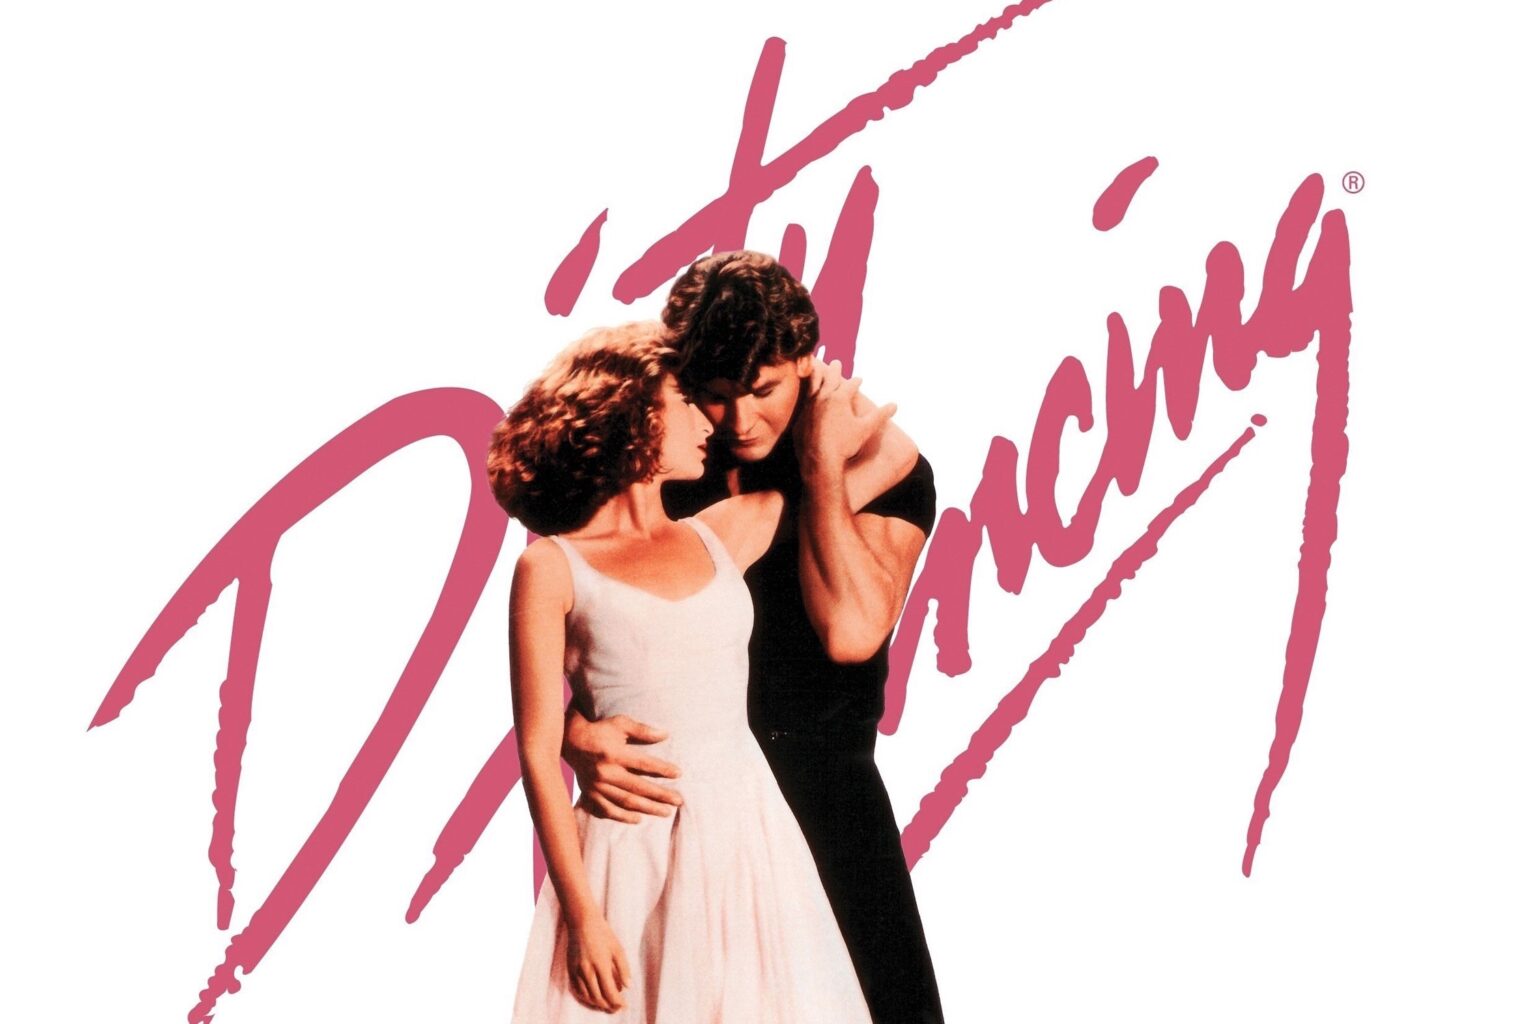 'Dirty Dancing' was more than your cliche 80s rom-com. A sequel is now in the works but who will be in the cast? Here's what we know.